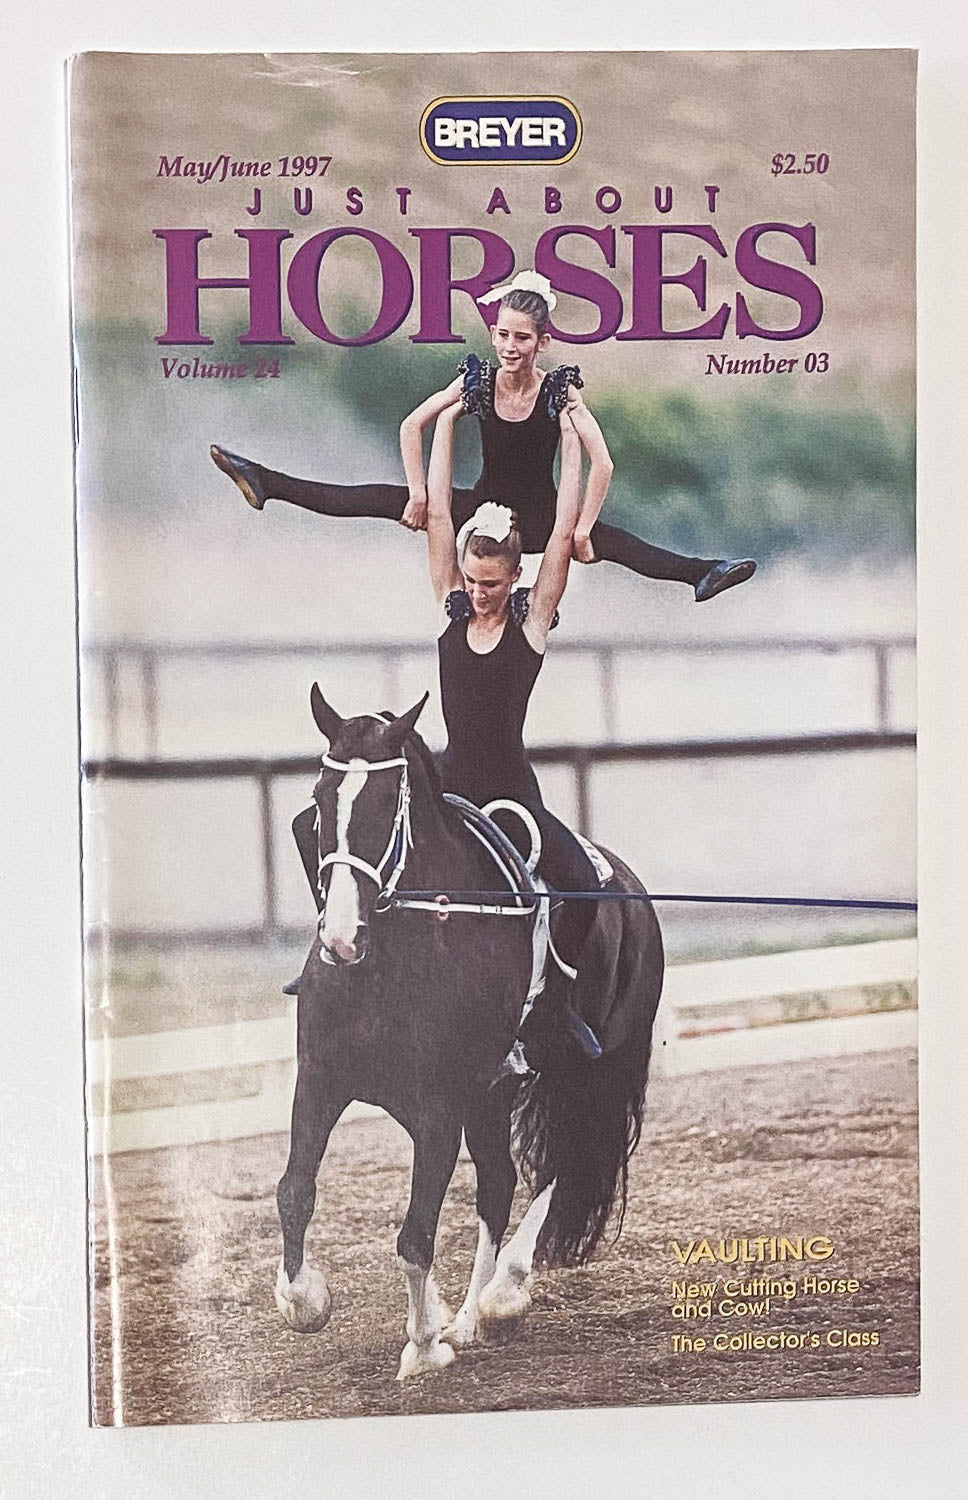 Just About Horses magazine Vol. 24, No. 3, 1997 May/June